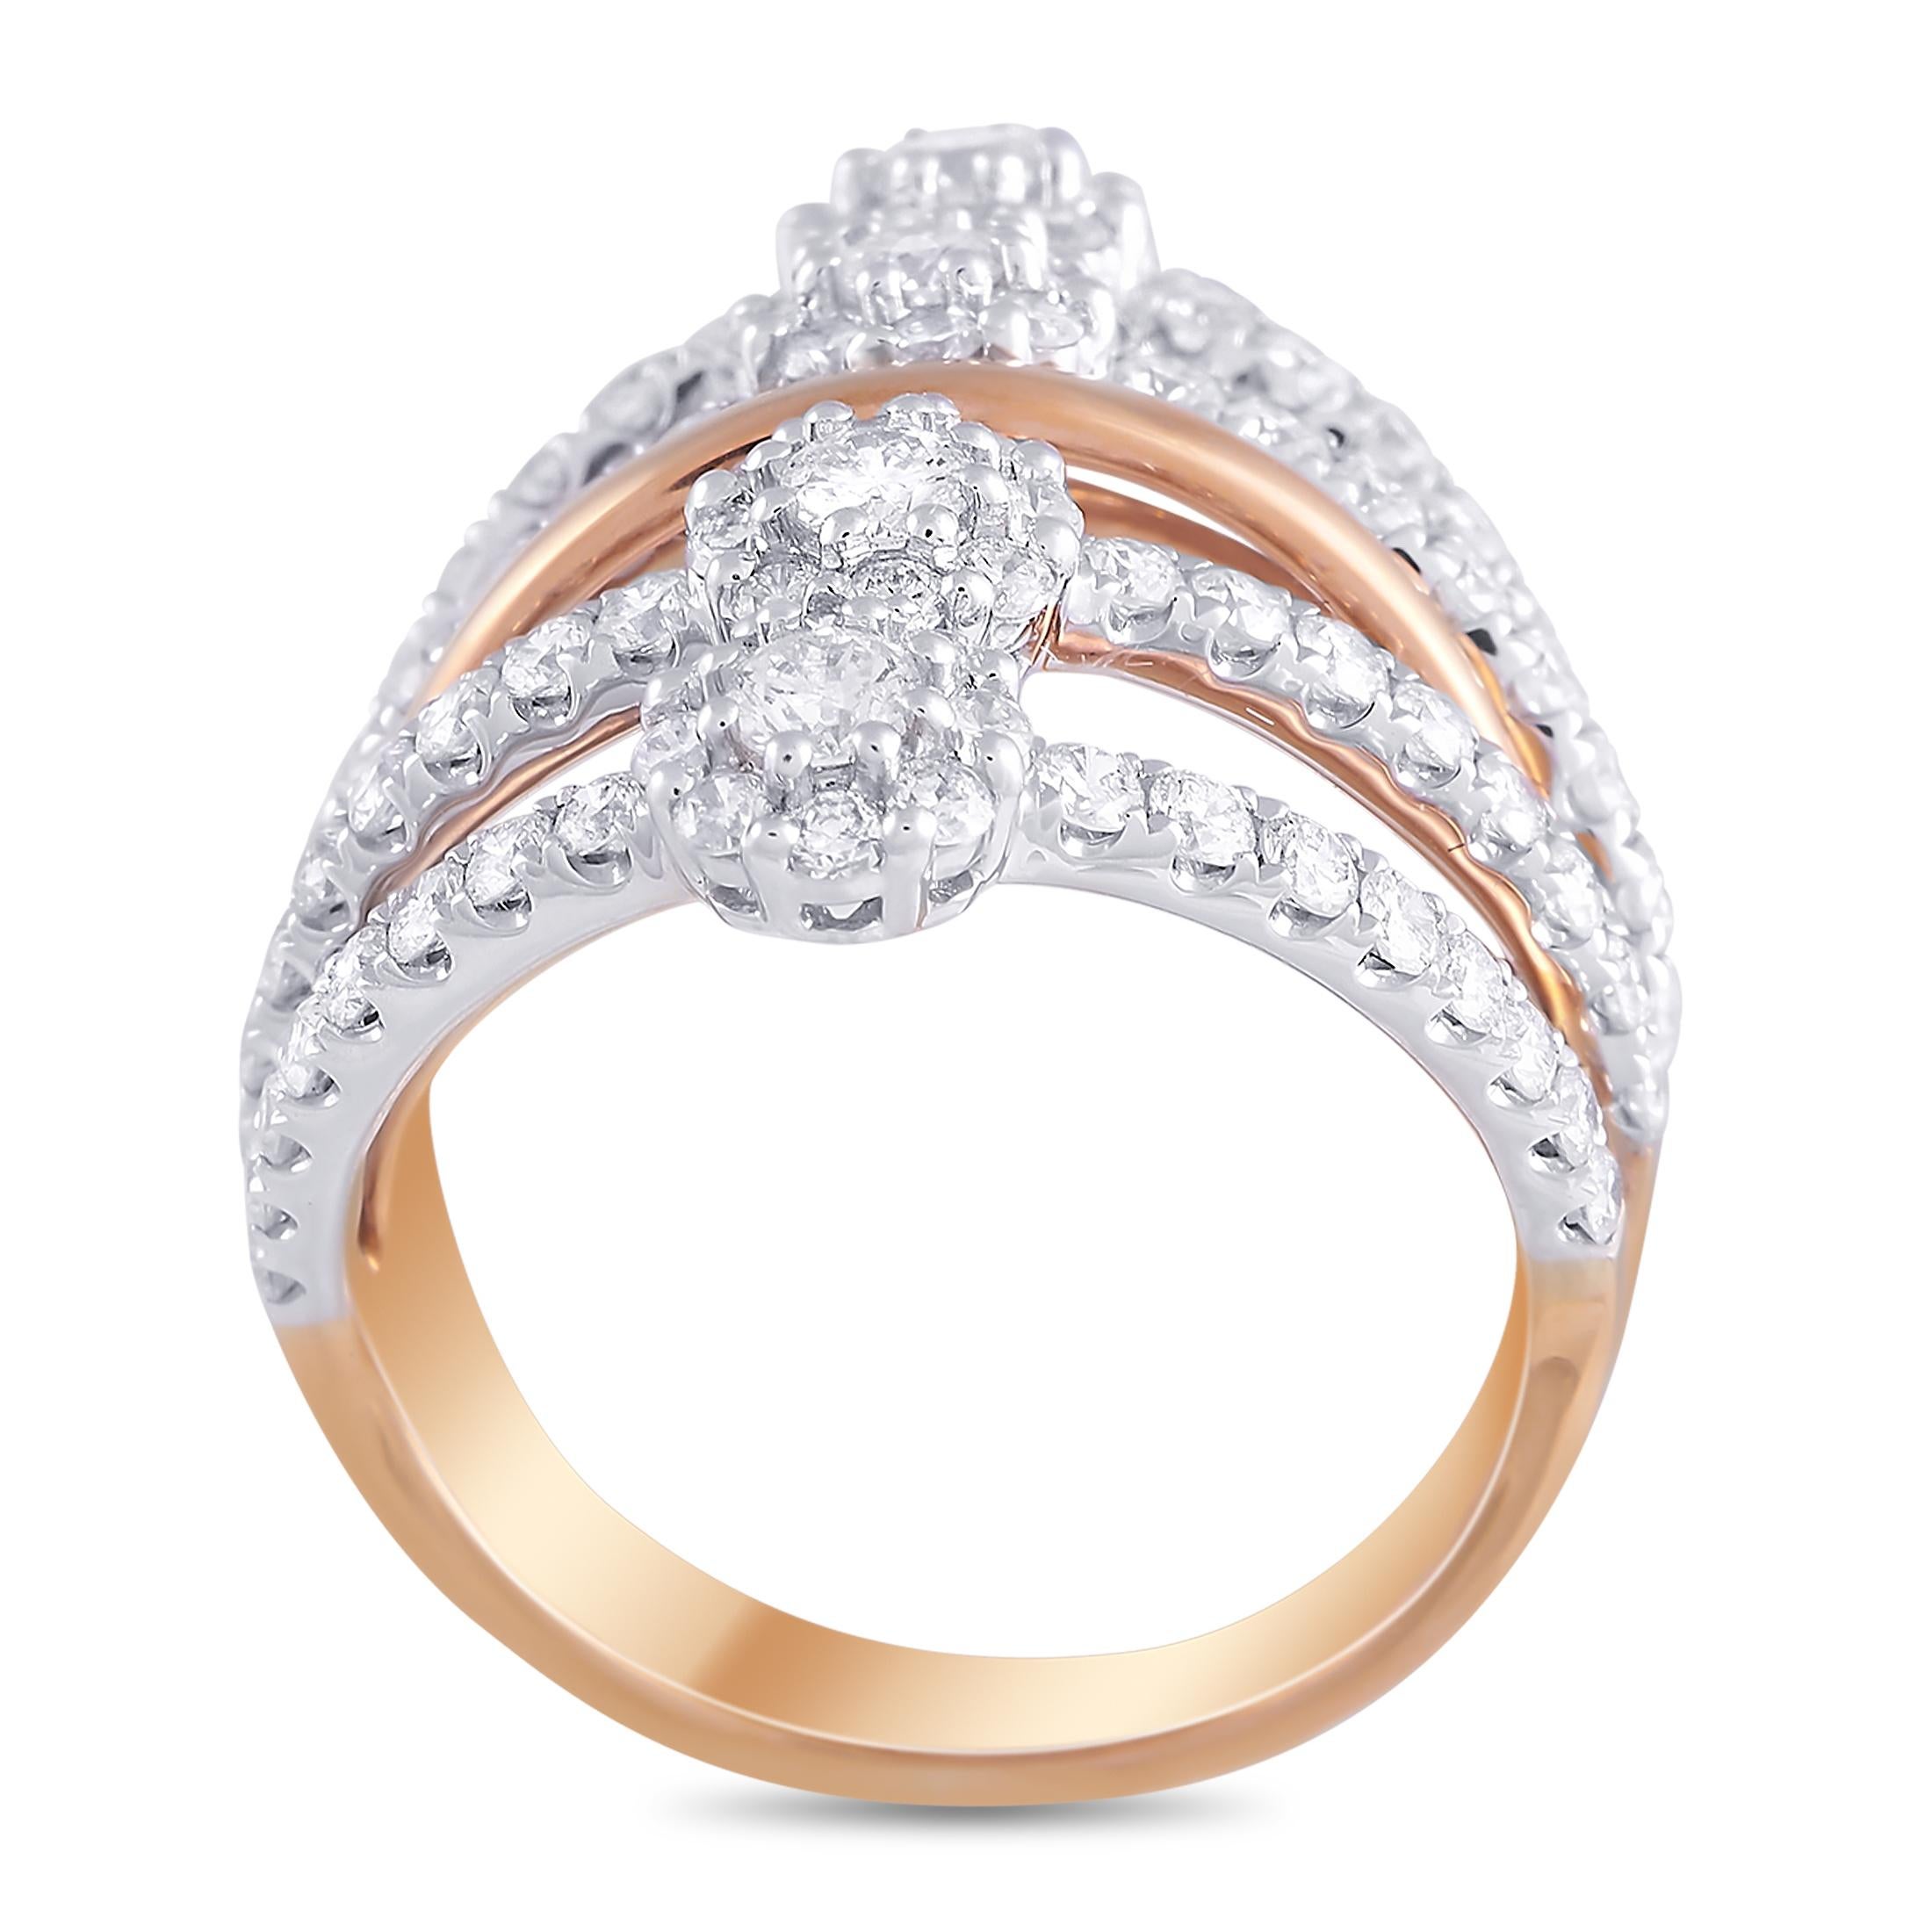 This unique LB Exclusive 18K Rose and White Gold 2.10 ct Diamond Ring is made with 18K gold in rose and white, giving the ring a distinct two-toned appearance. The band is split into four distinct sections on the front, giving the appearance of a